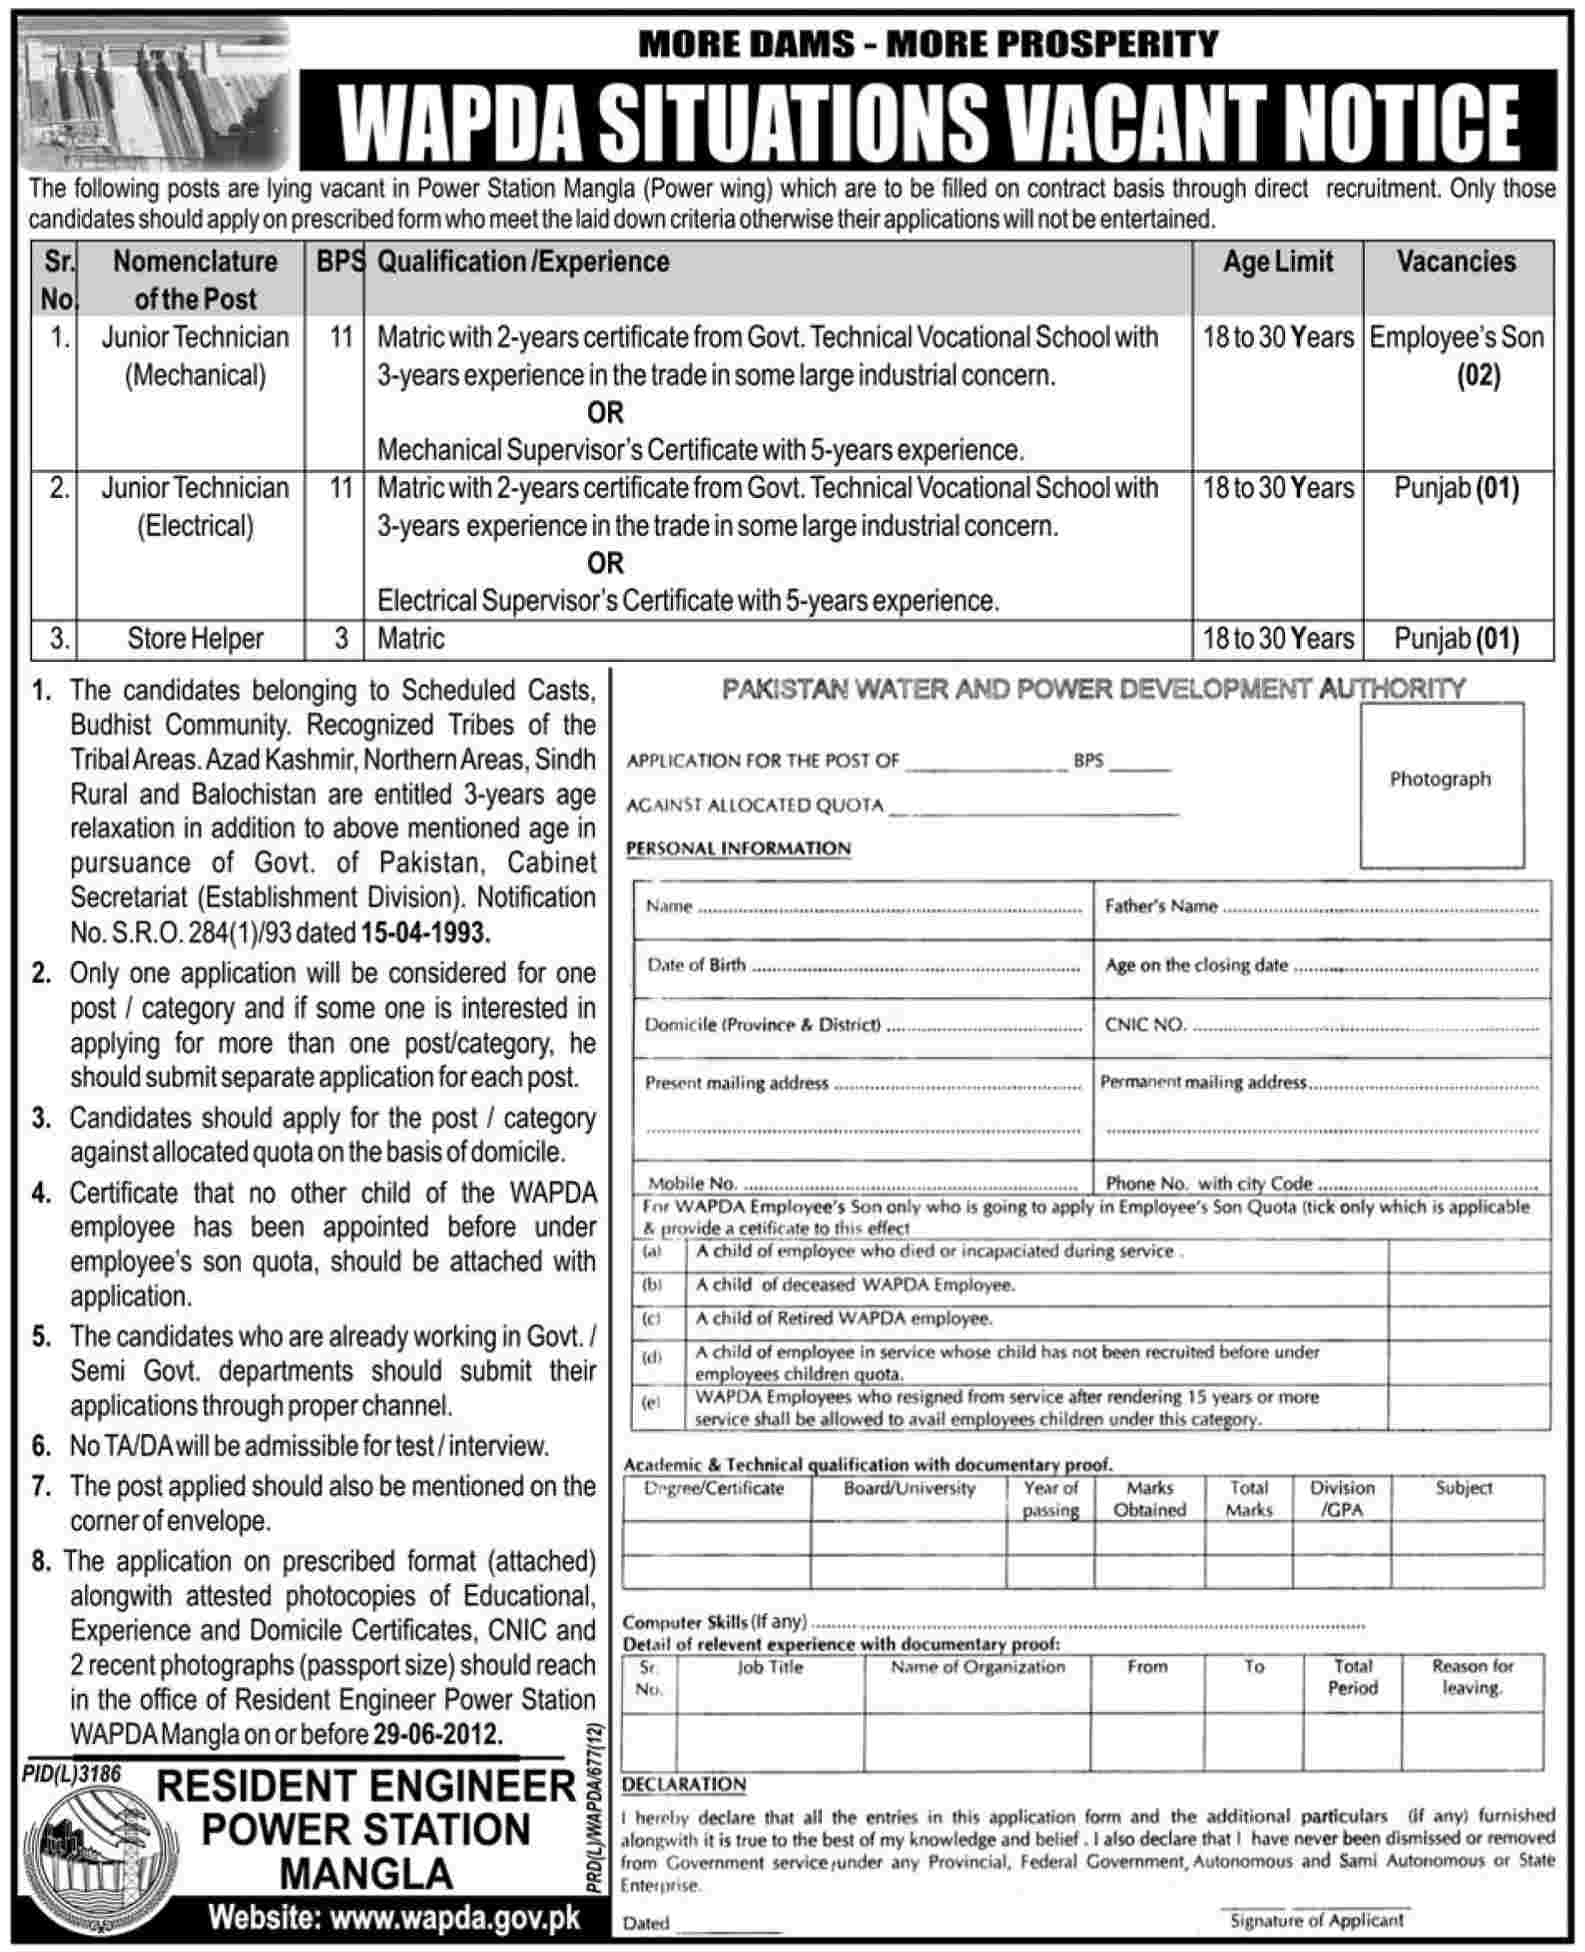 Technical Staff Required under WAPDA at Power Station